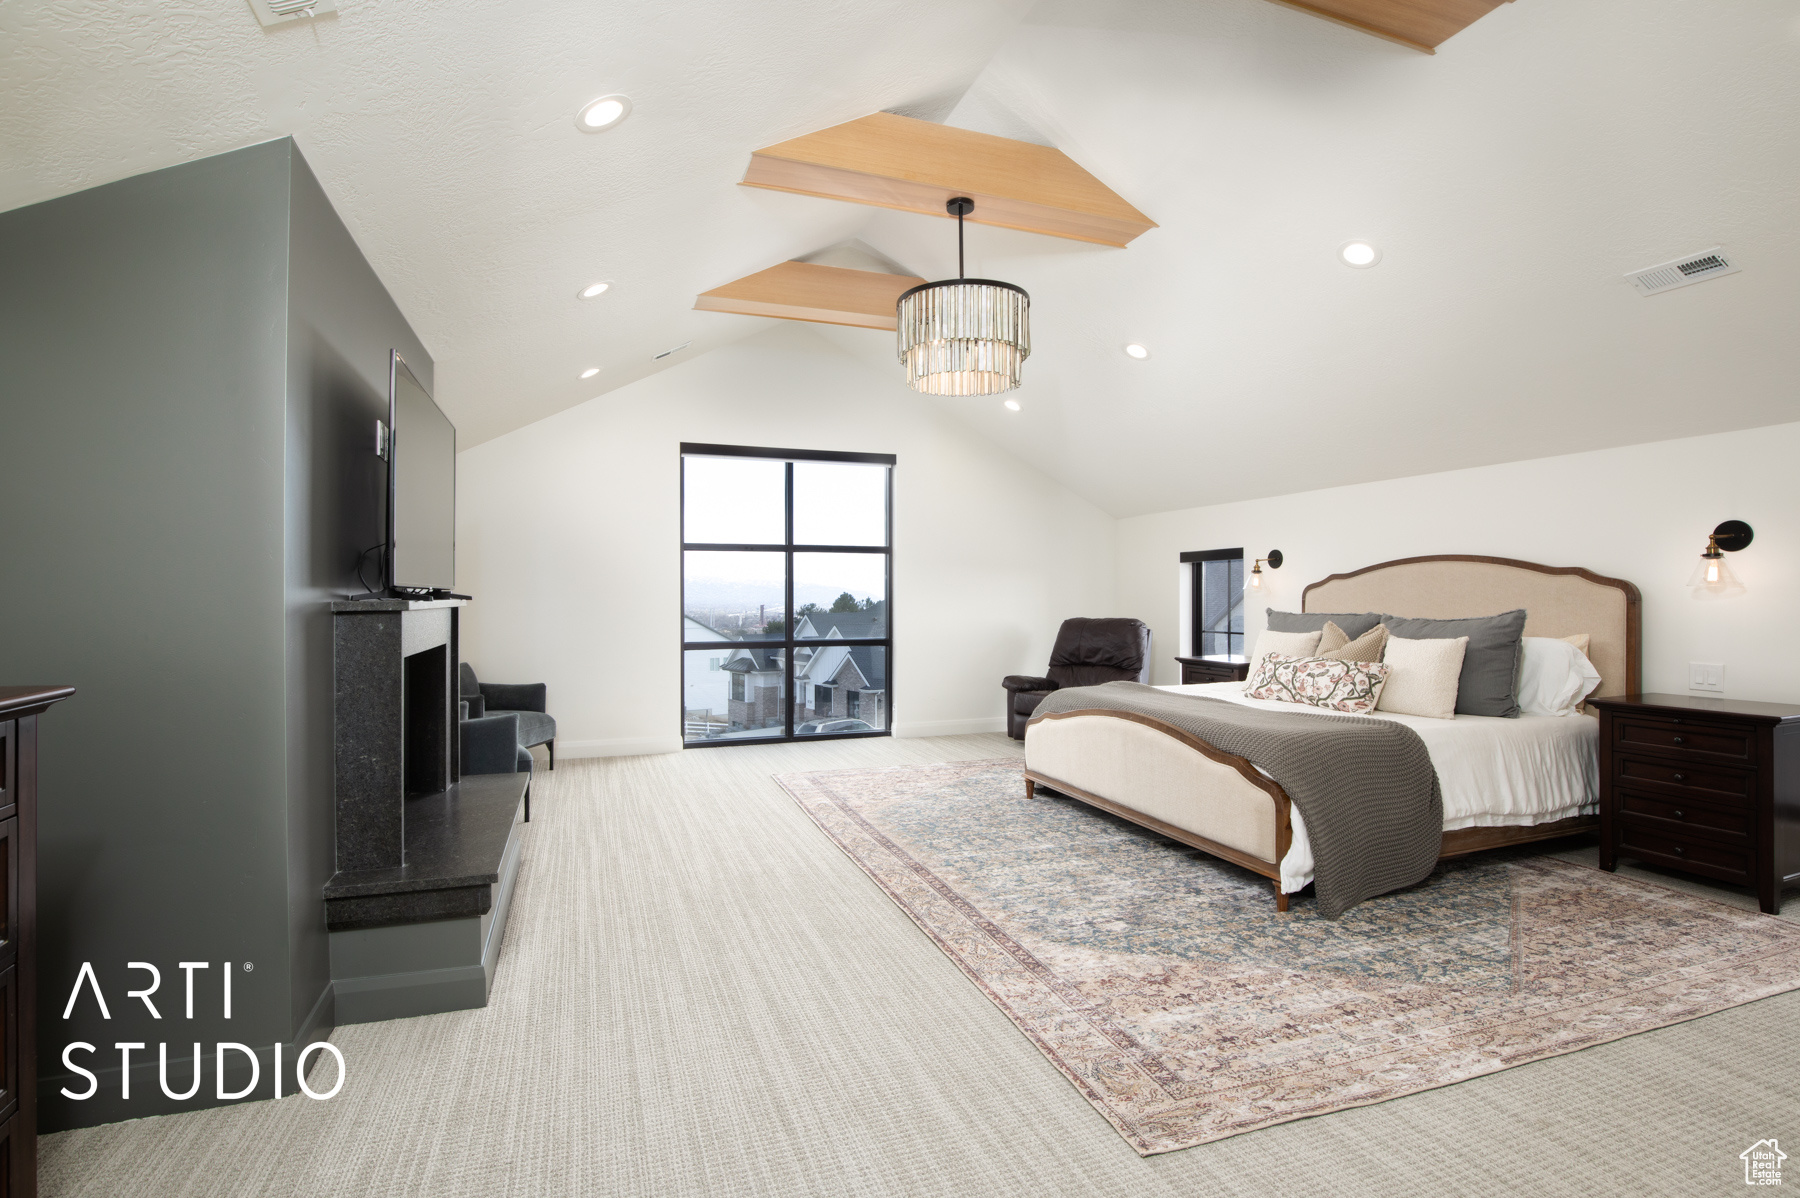 Primary bedroom featuring lofted ceiling with beams, light carpet, and a chandelier